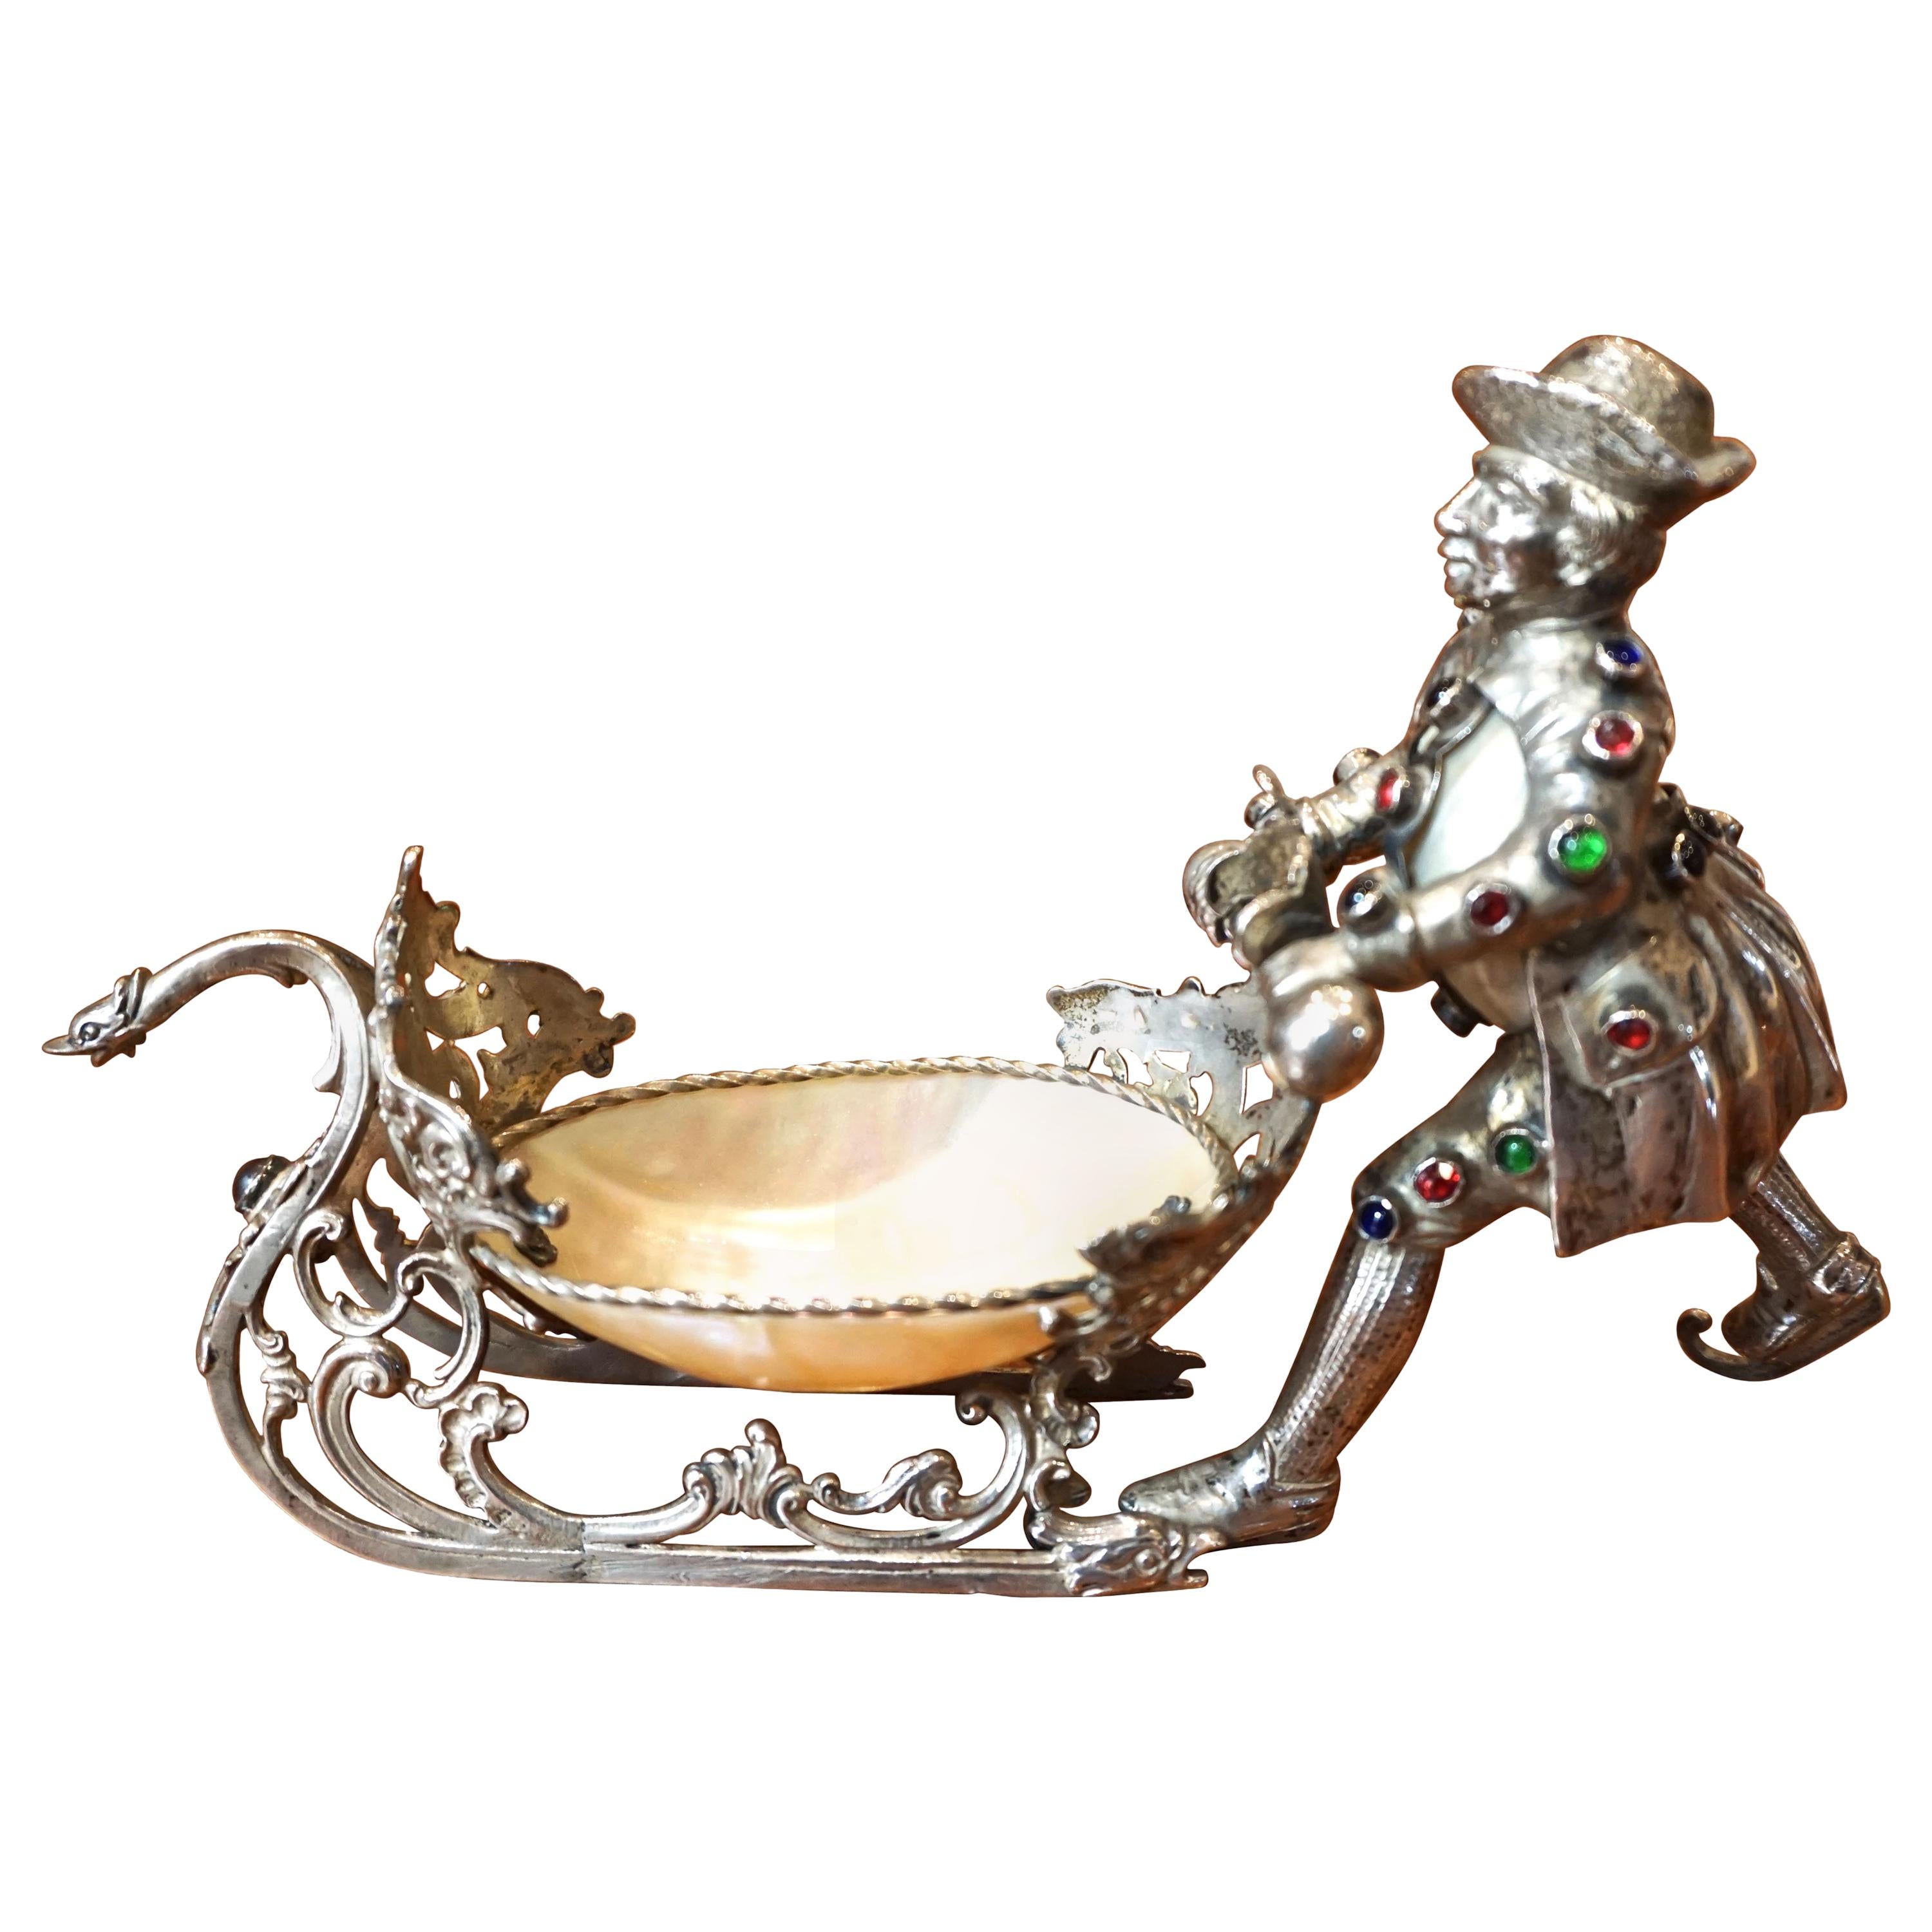 Dutch Silver Plate and Shell Sleigh Driven by Bejeweled Gentleman on Iceskates